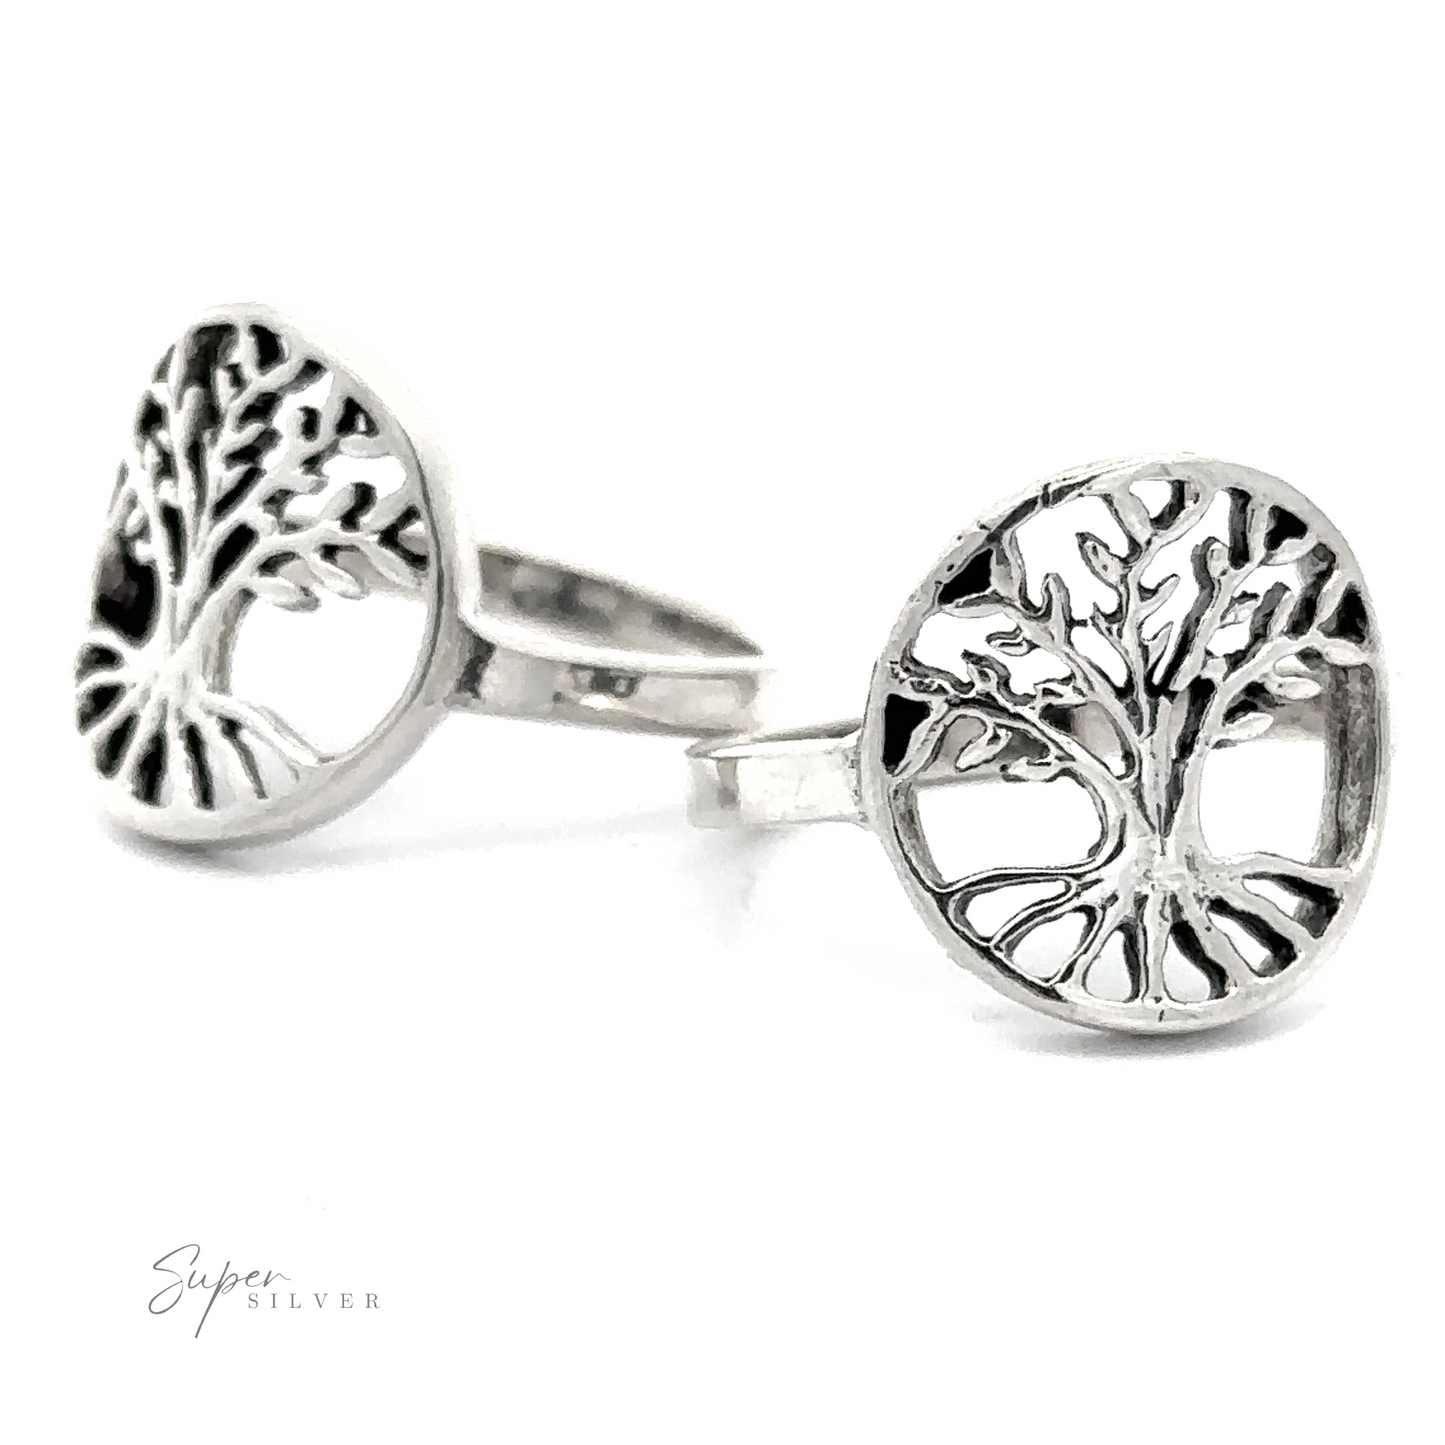 A pair of Tree of Life Rings displayed against a white background.